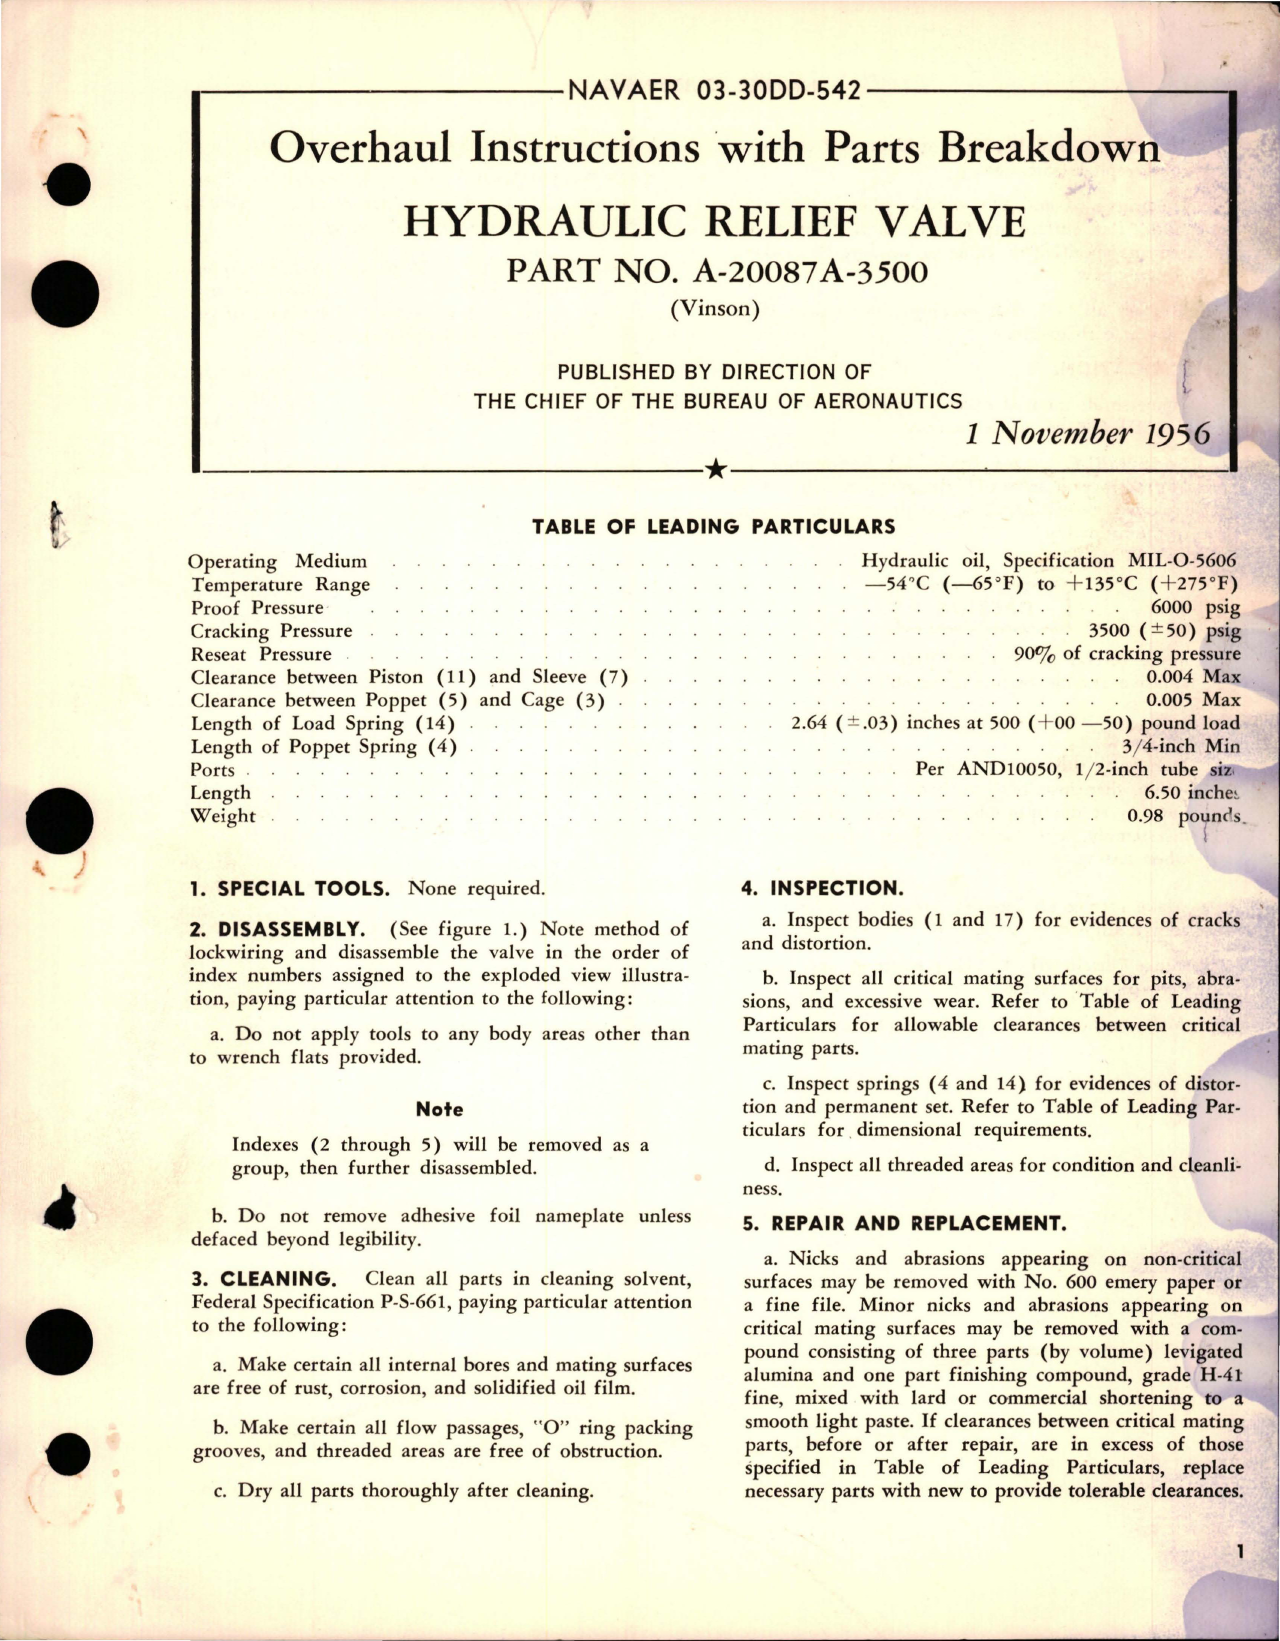 Sample page 1 from AirCorps Library document: Overhaul Instructions with Parts for Hydraulic Relief Valve - Part A-20087A-3500